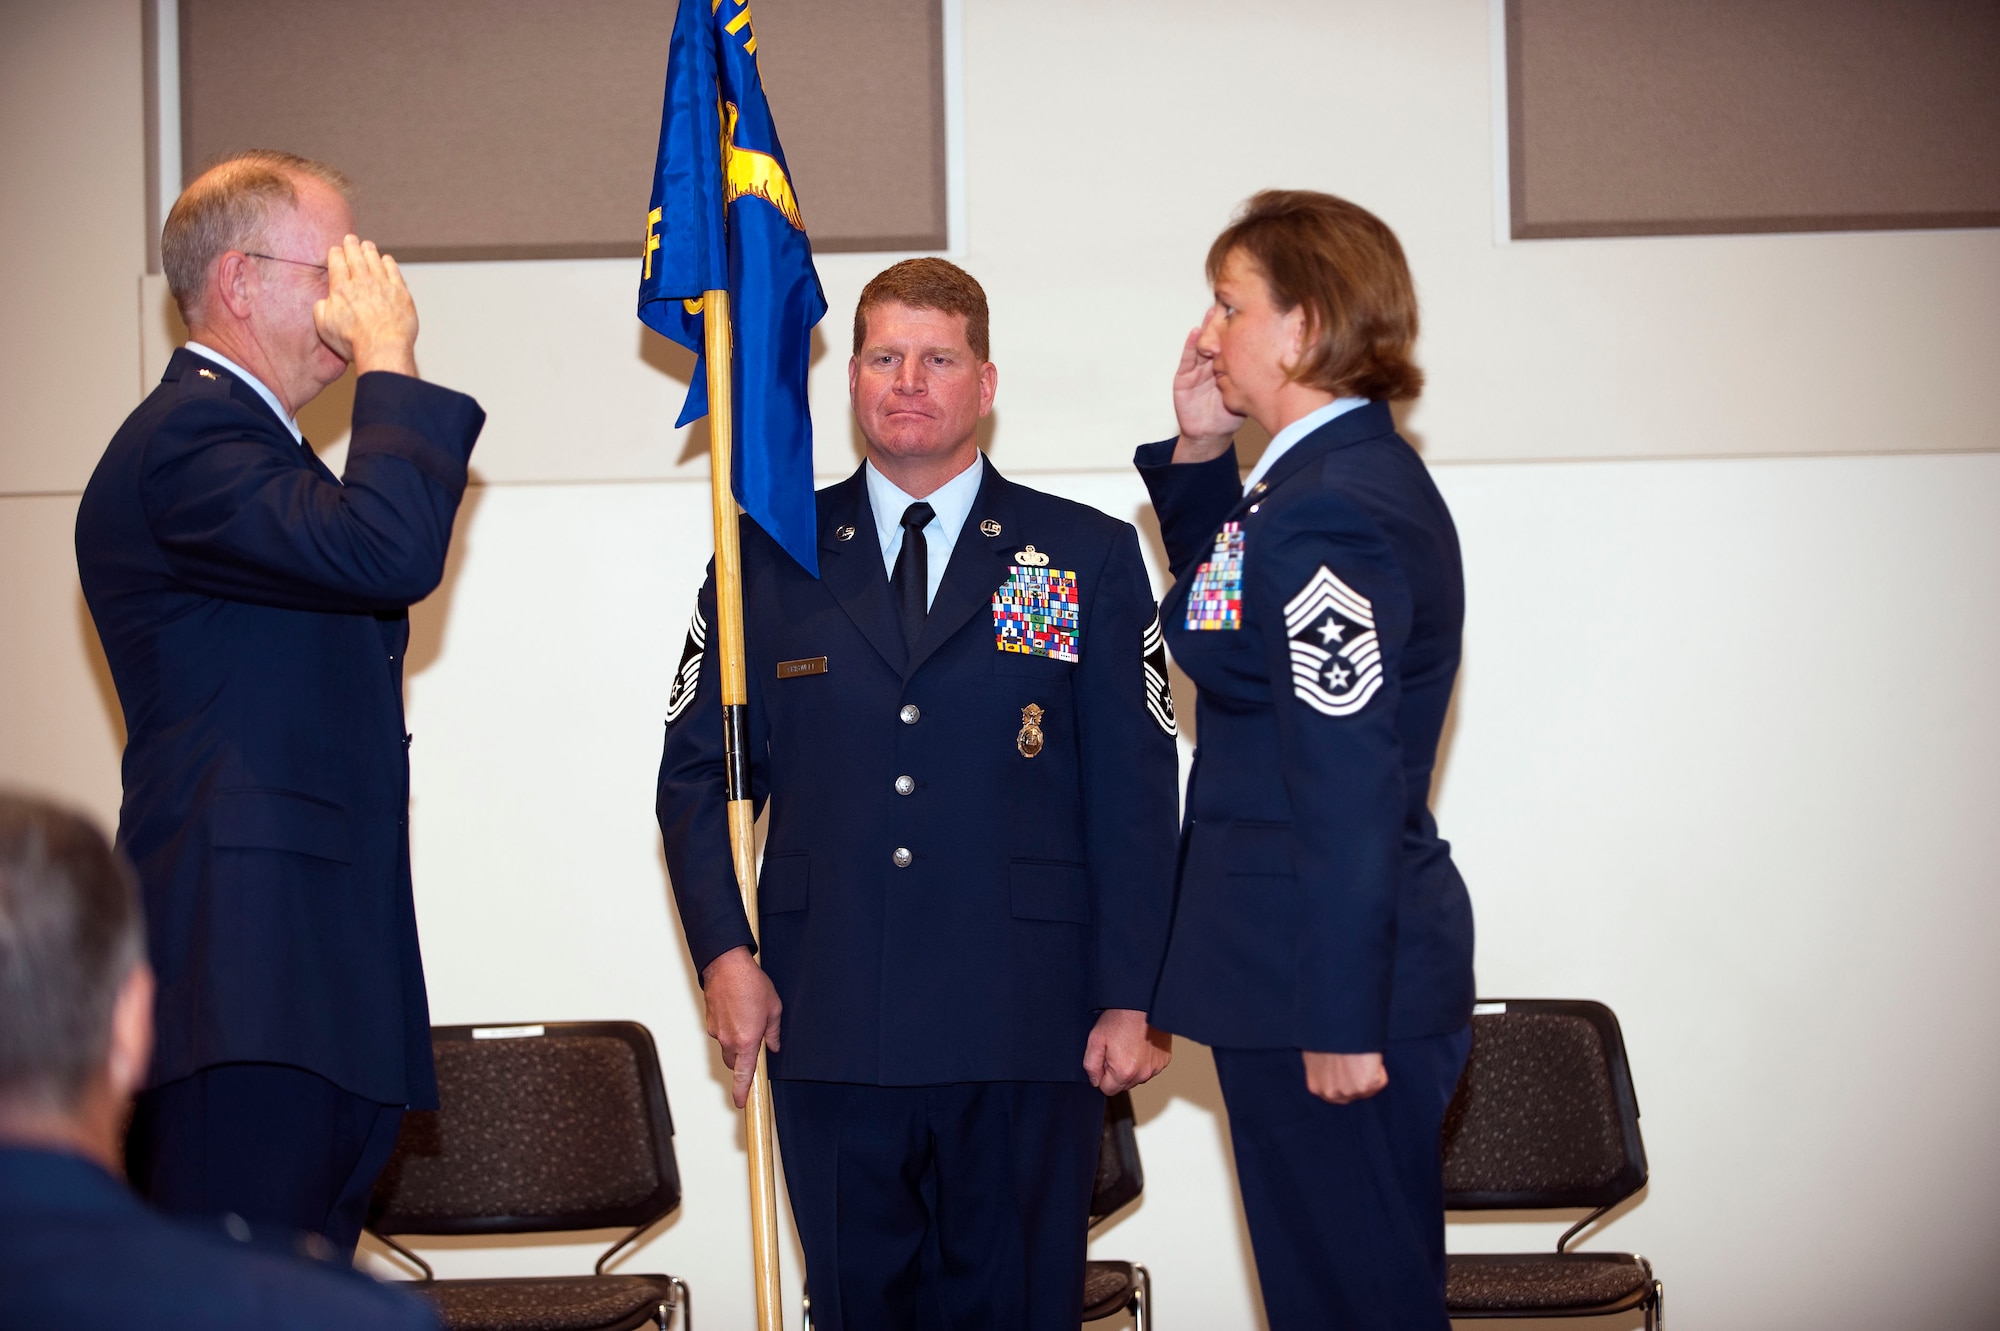 Command Chief Master Sgt. Annadele F. Kenderes accepts authority as Colorado?s newest state command chief master sergeant from Colorado Air National Guard Commander Brig. Gen. Bill Hudson during a ceremony at Buckley Air Force Base, Colo., Oct 4, 2009. (U.S. Air Force photo by Master Sgt. John Nimmo, Sr.) (Released)